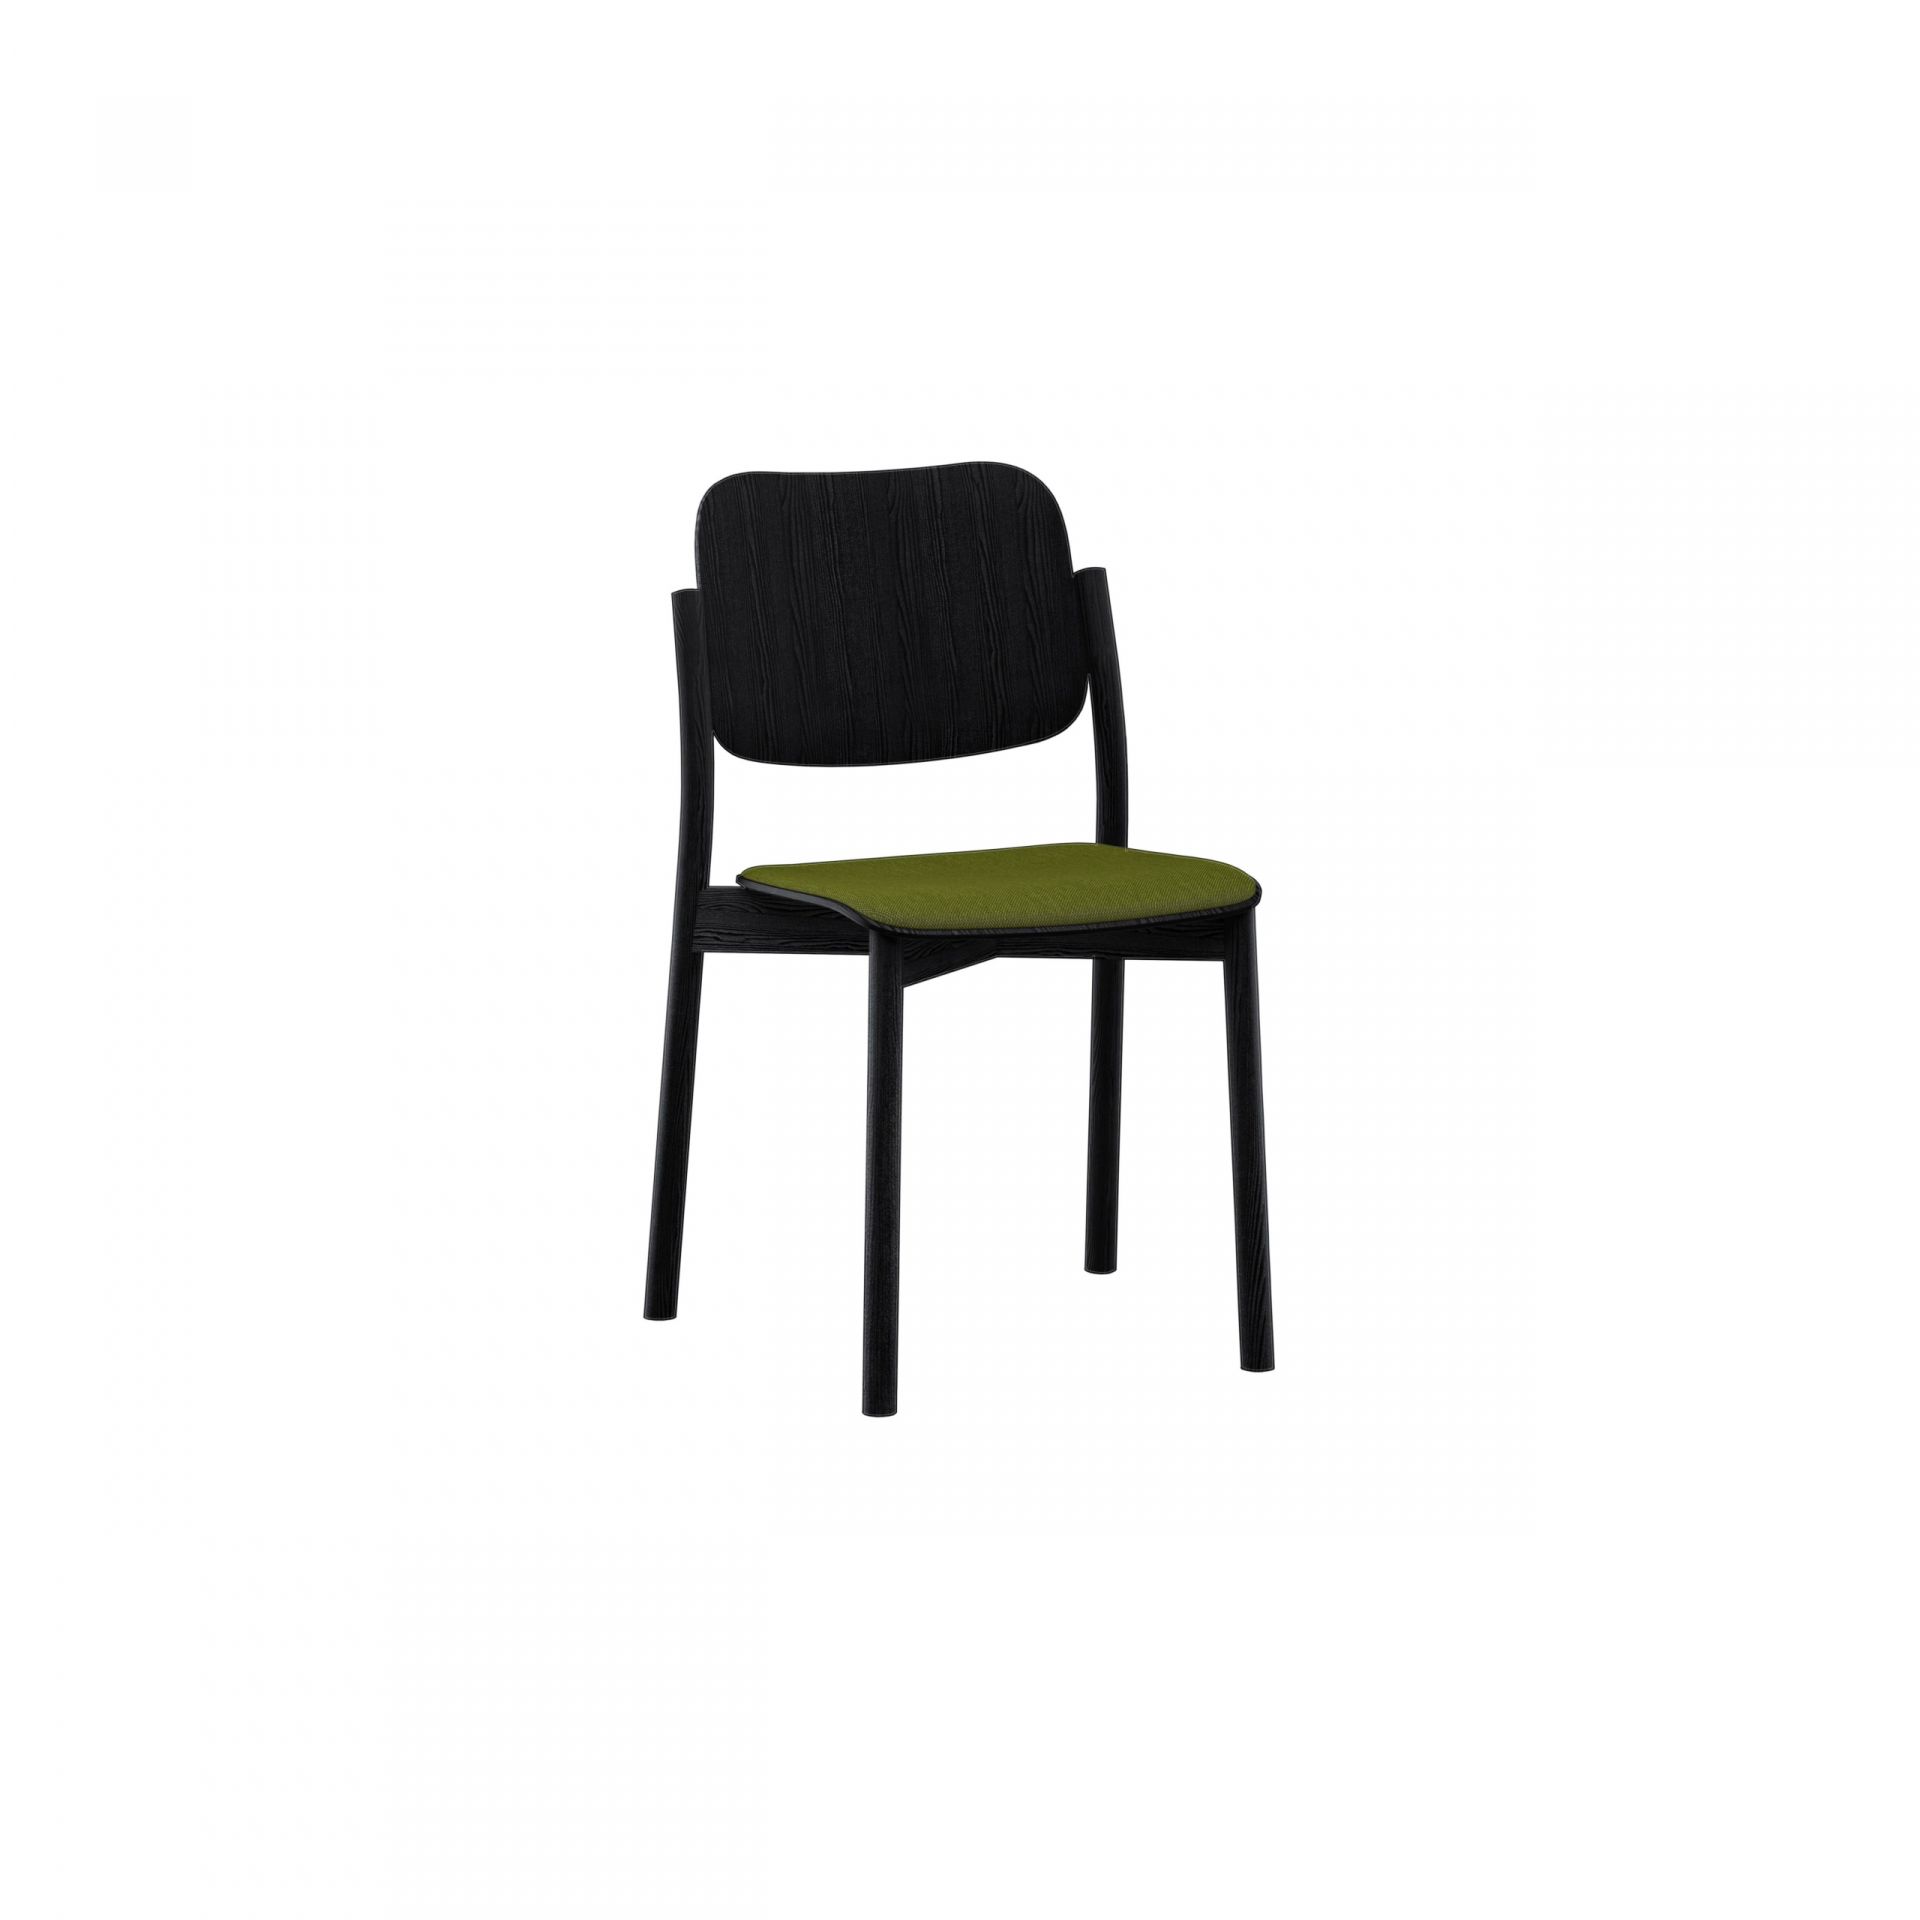 Zoe Wooden chair product image 7